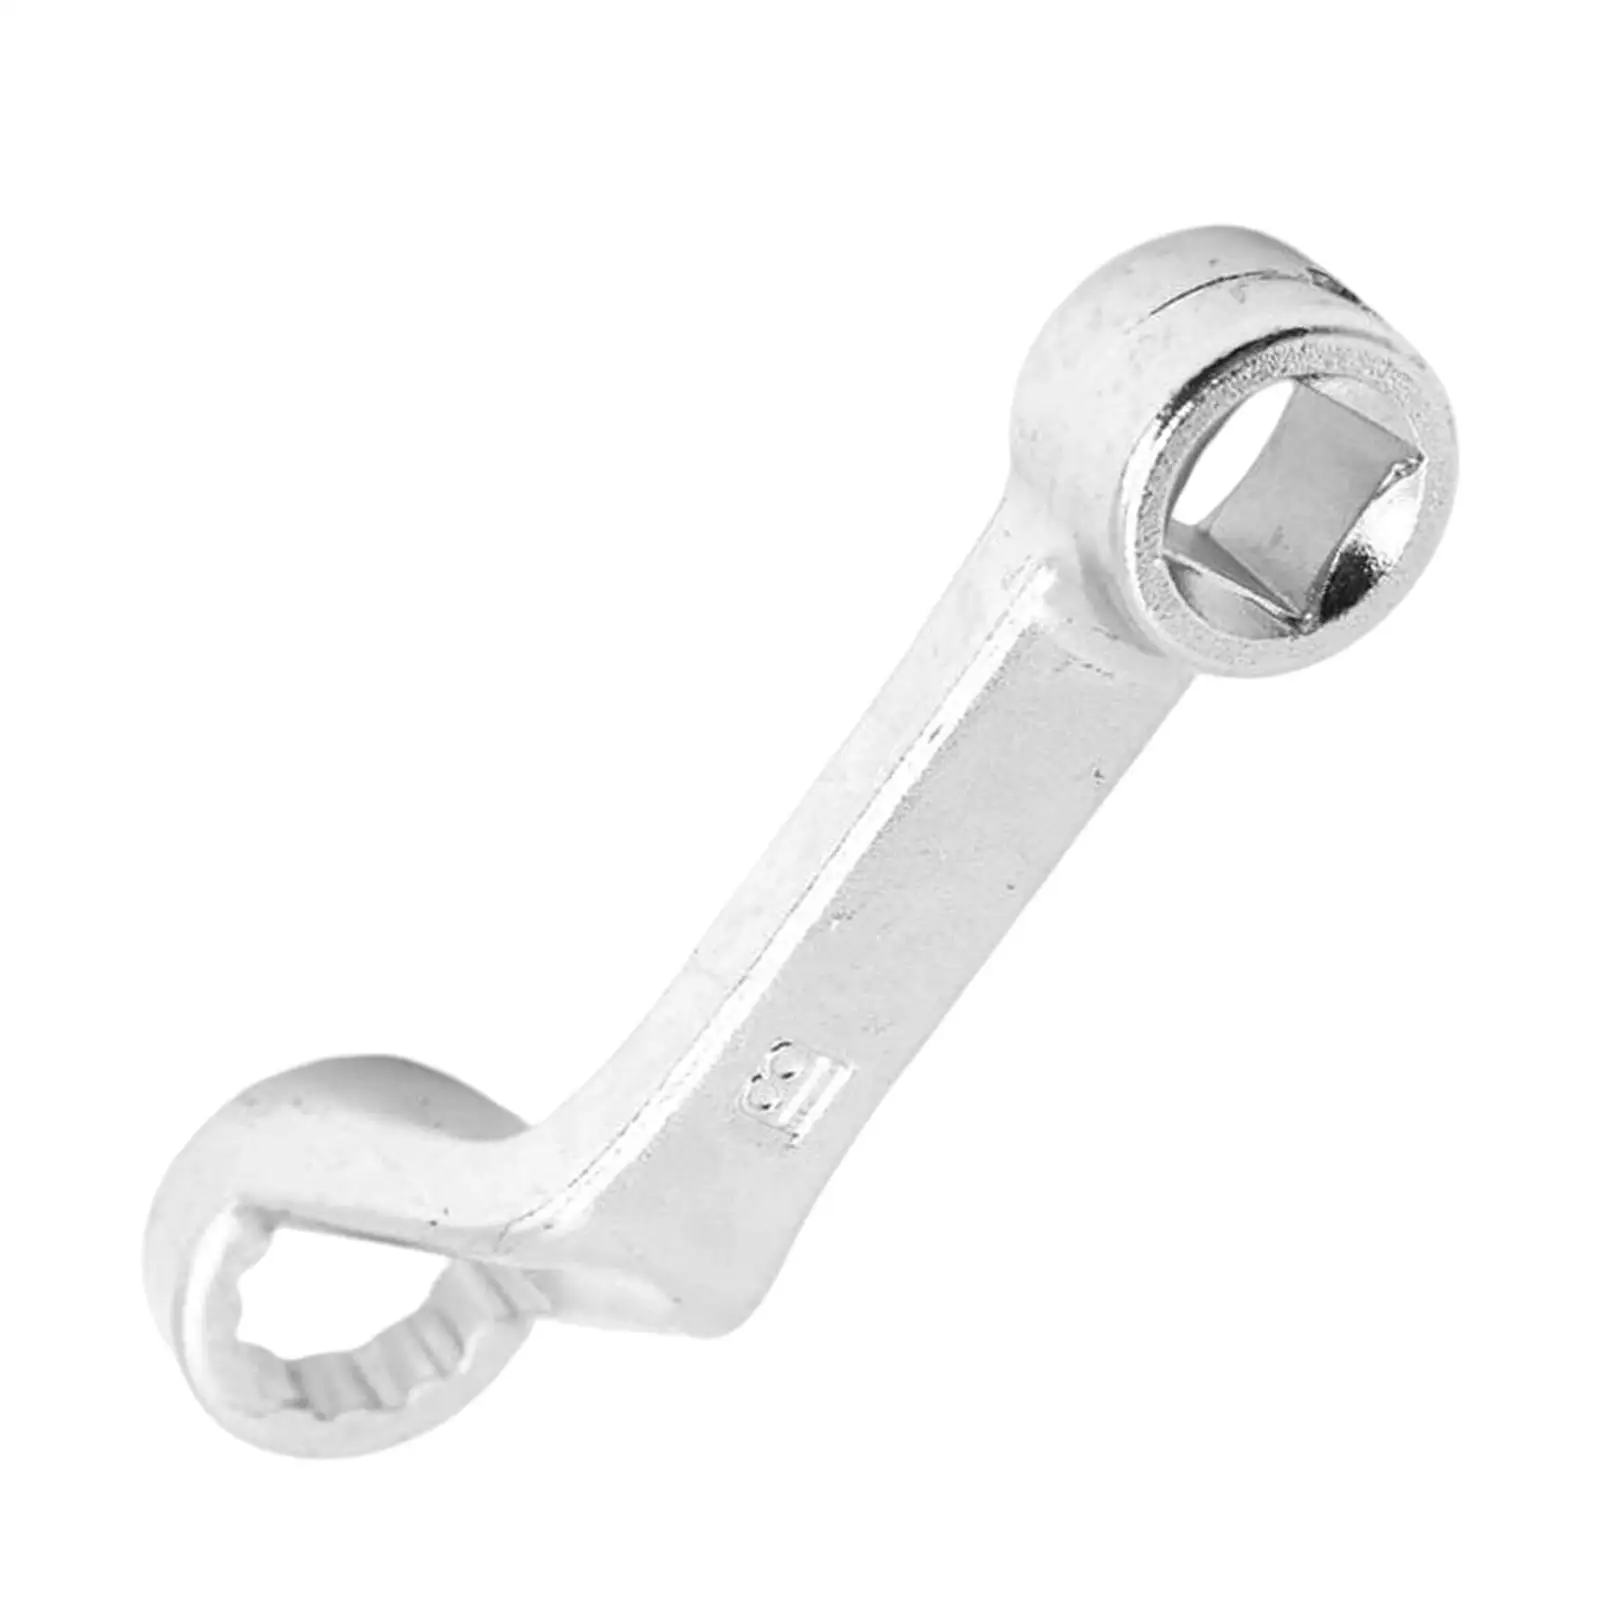 Camber Adjusting Wrench T10179 Durable for Car Repair Wheel Alignment Tool